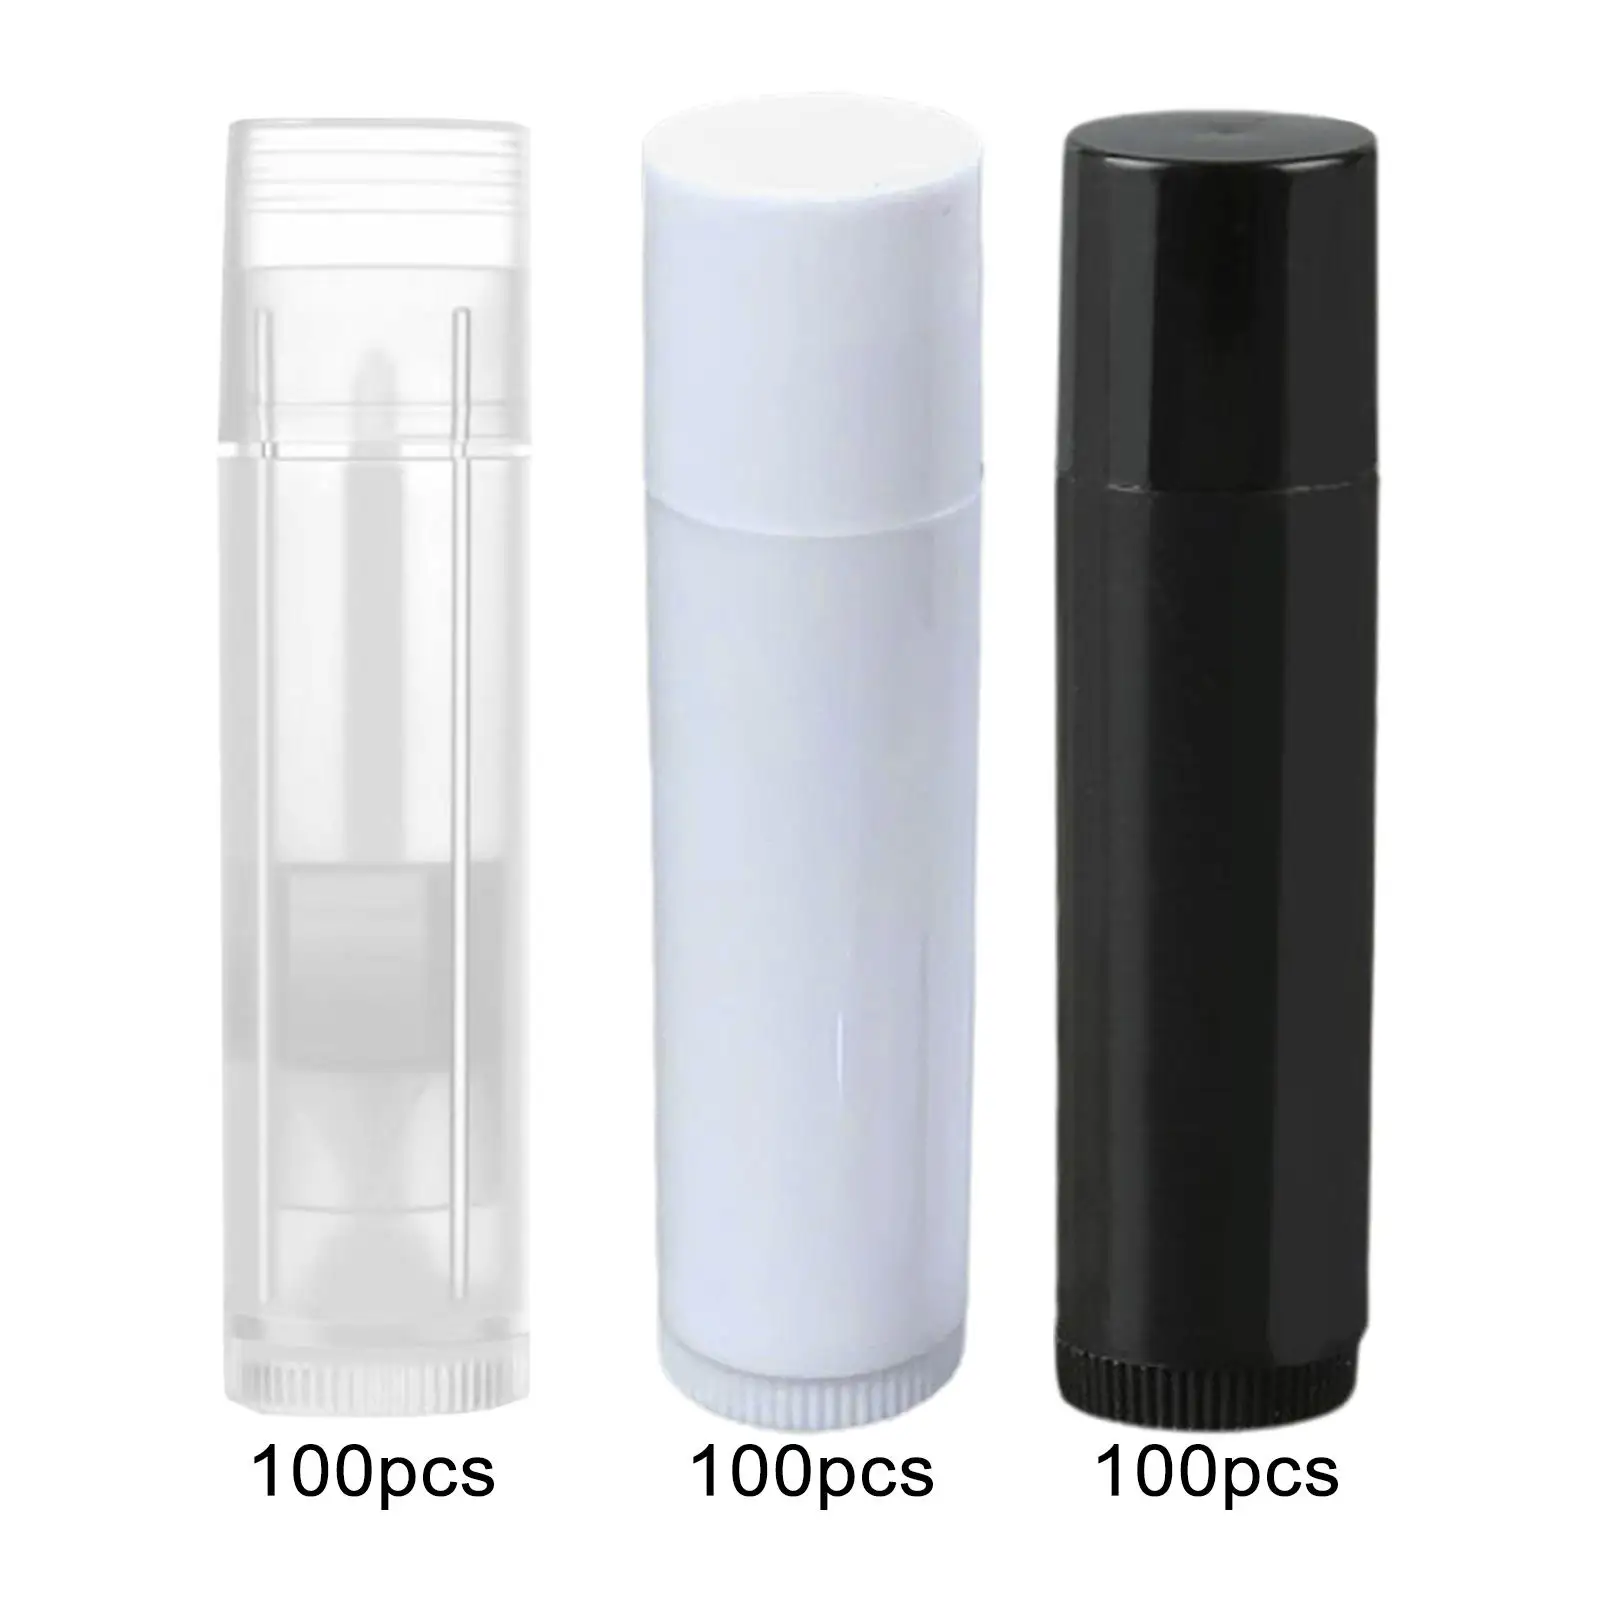 

100Pcs Tubes Containers Bottles for Valentine's Day Present Women Girls